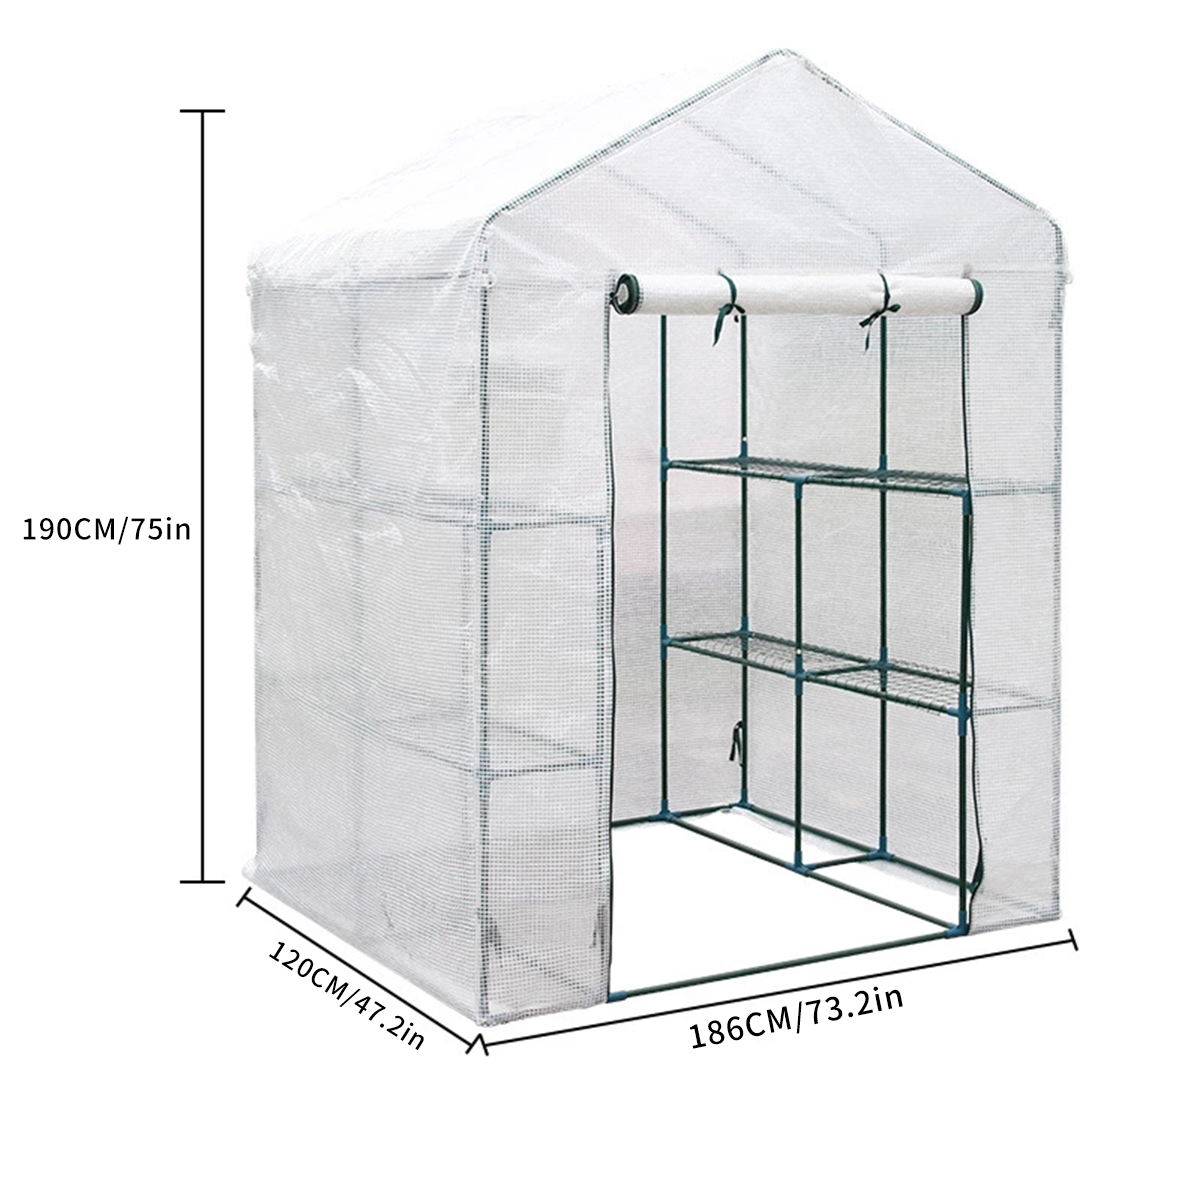 Greenhouse-Walk-In-PVC-With-Shelf-Cover-Outdoor-Tent-House-Plants-186x120x190CM-1771816-8